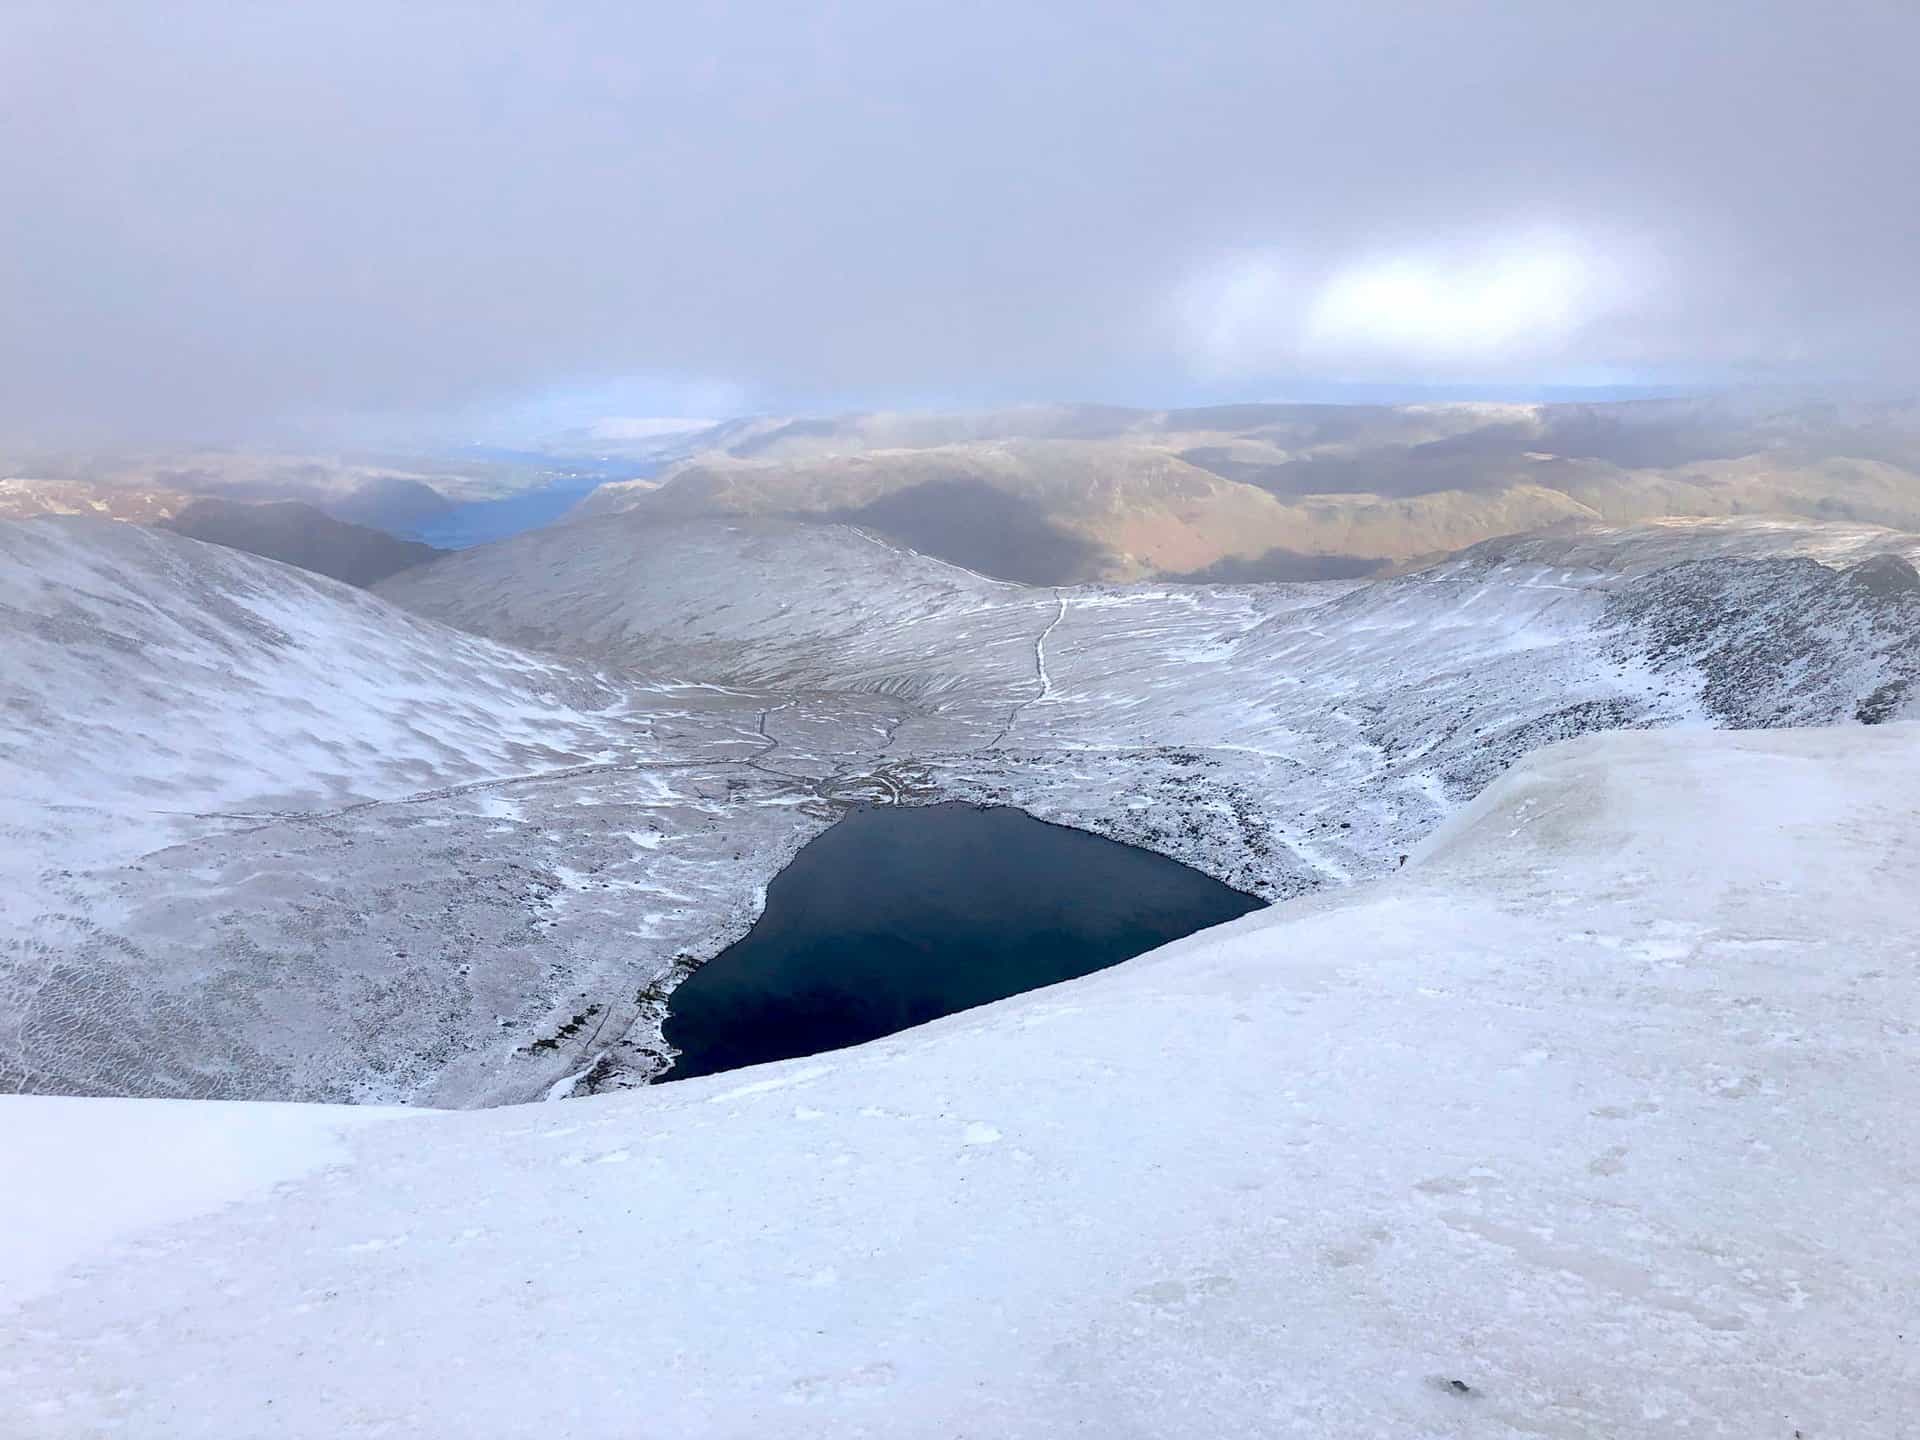 Red Tarn and Ullswater seen from above, postcard-worthy from Helvellyn.